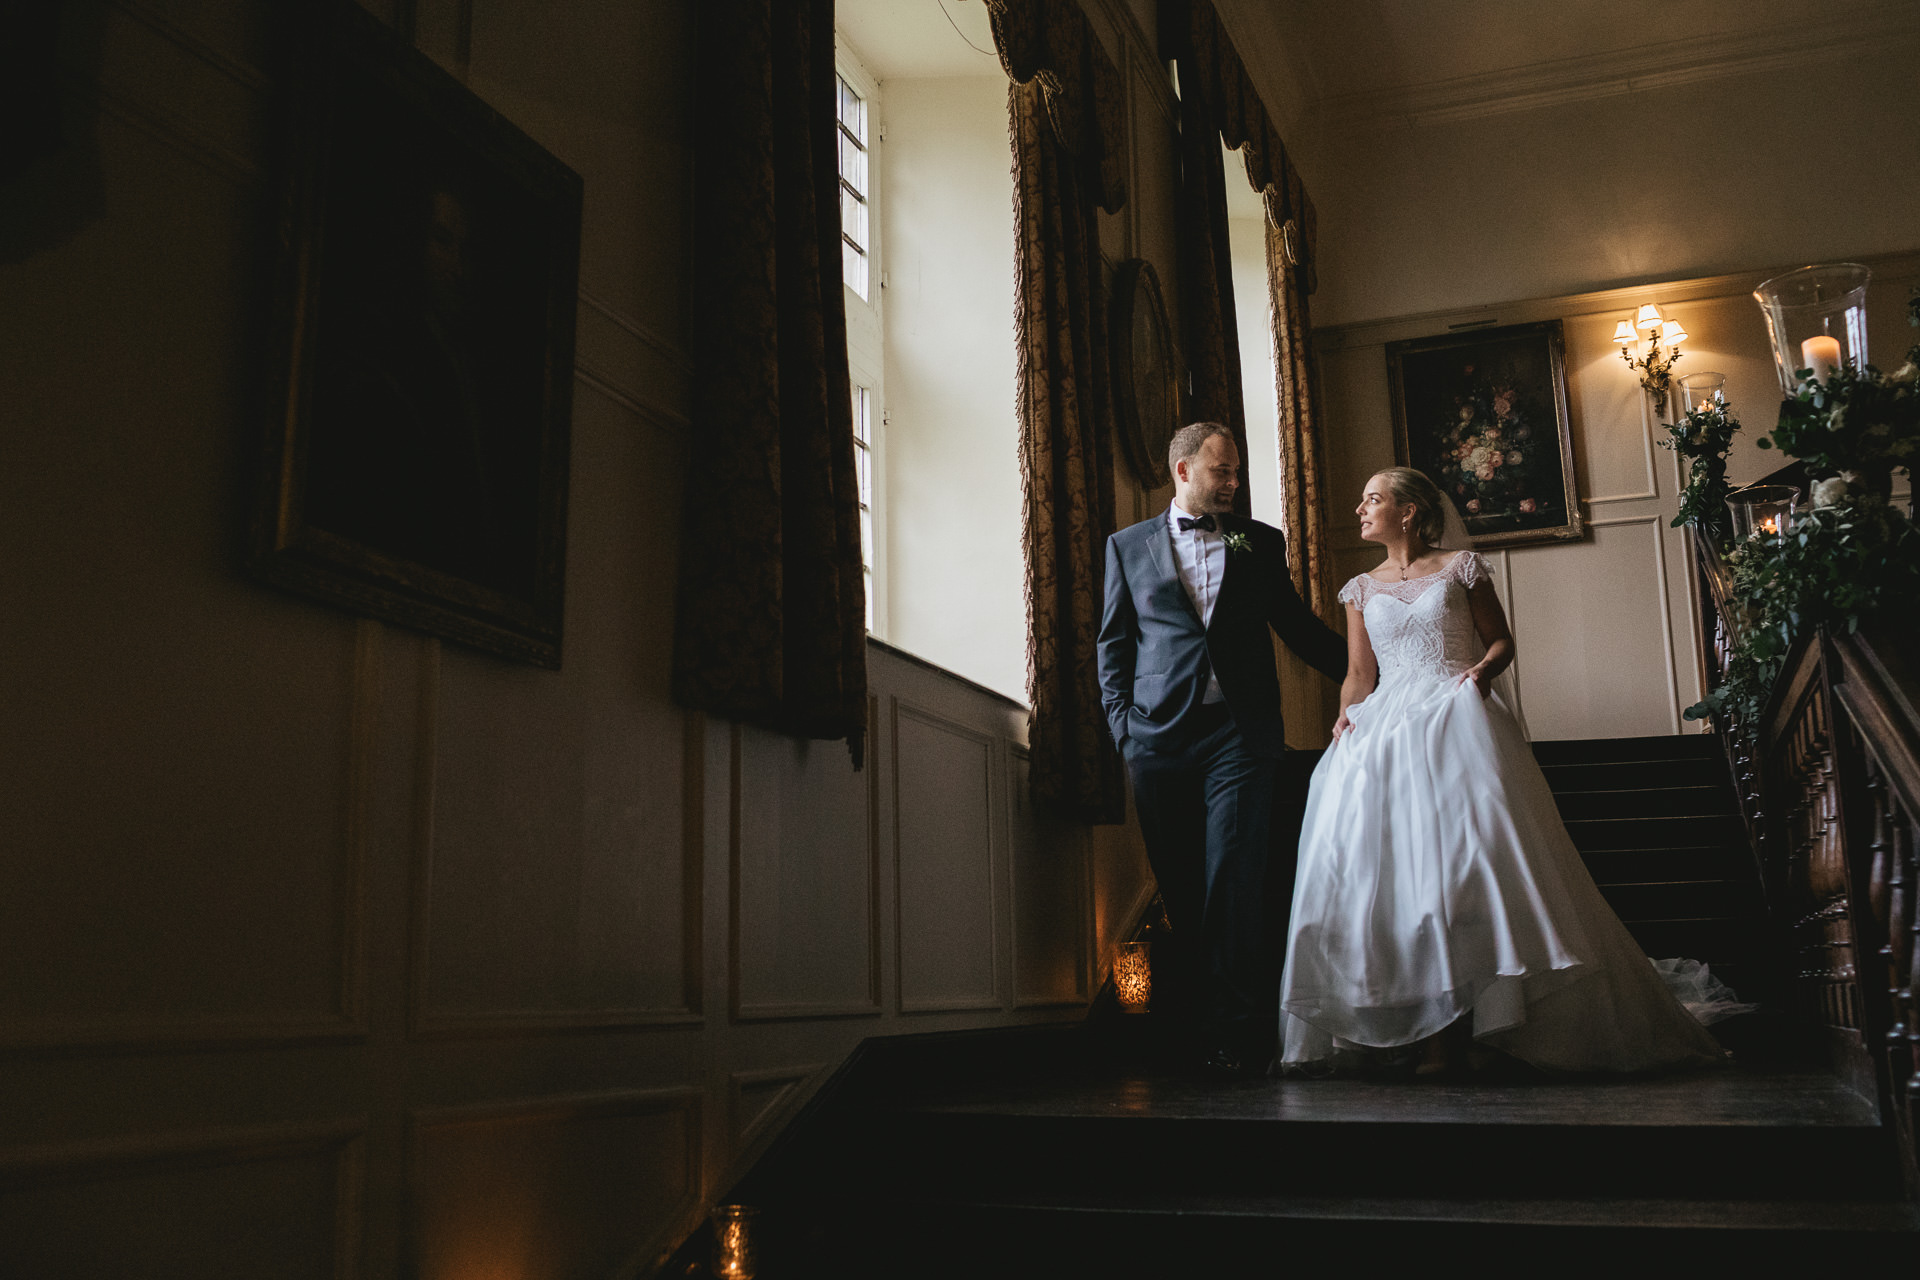 Bride and groom walking down a grand staircase